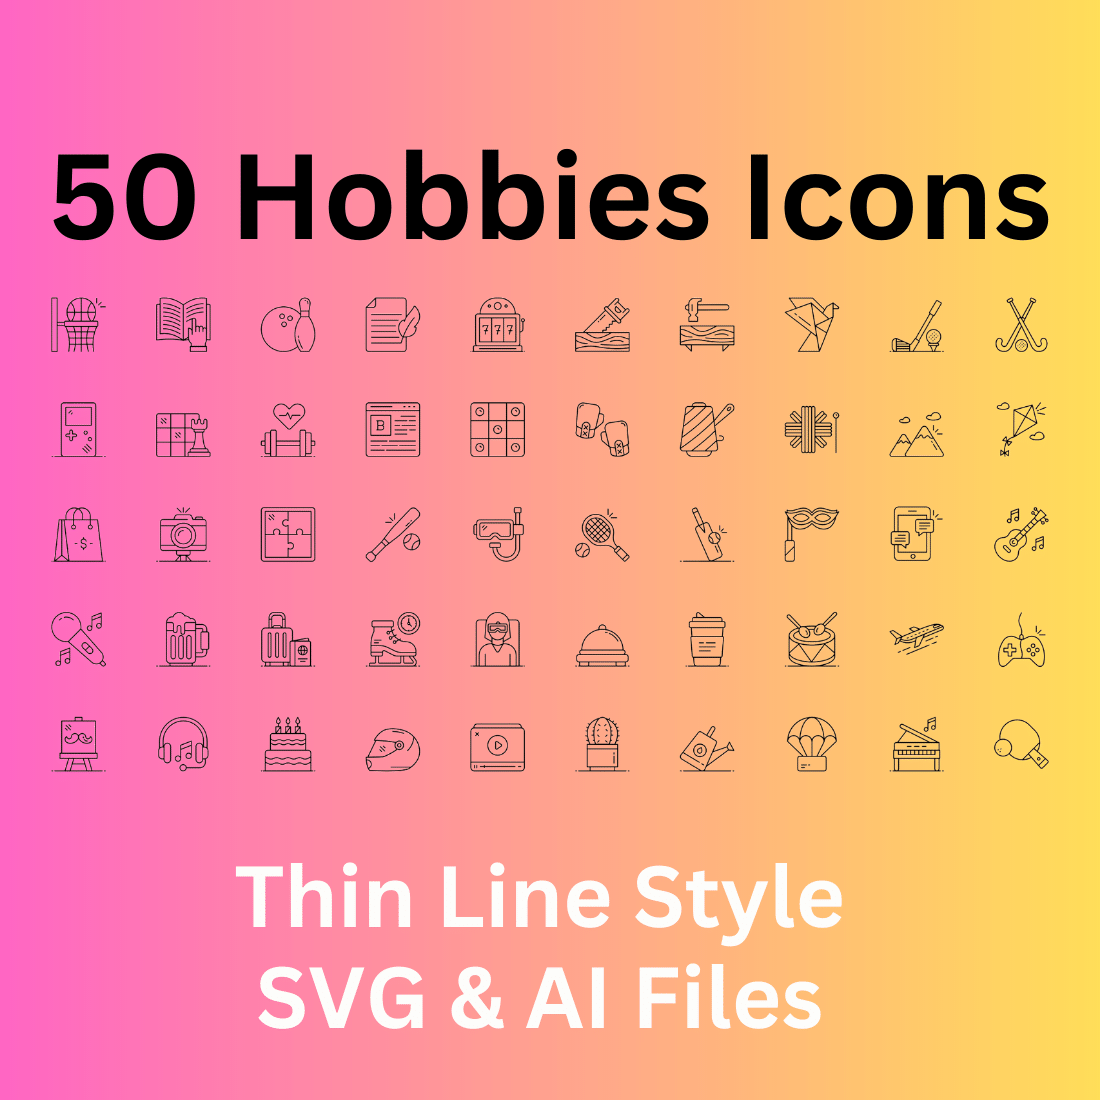 Hobbies Icon Set 50 Outline Icons - SVG And AI Files cover image.